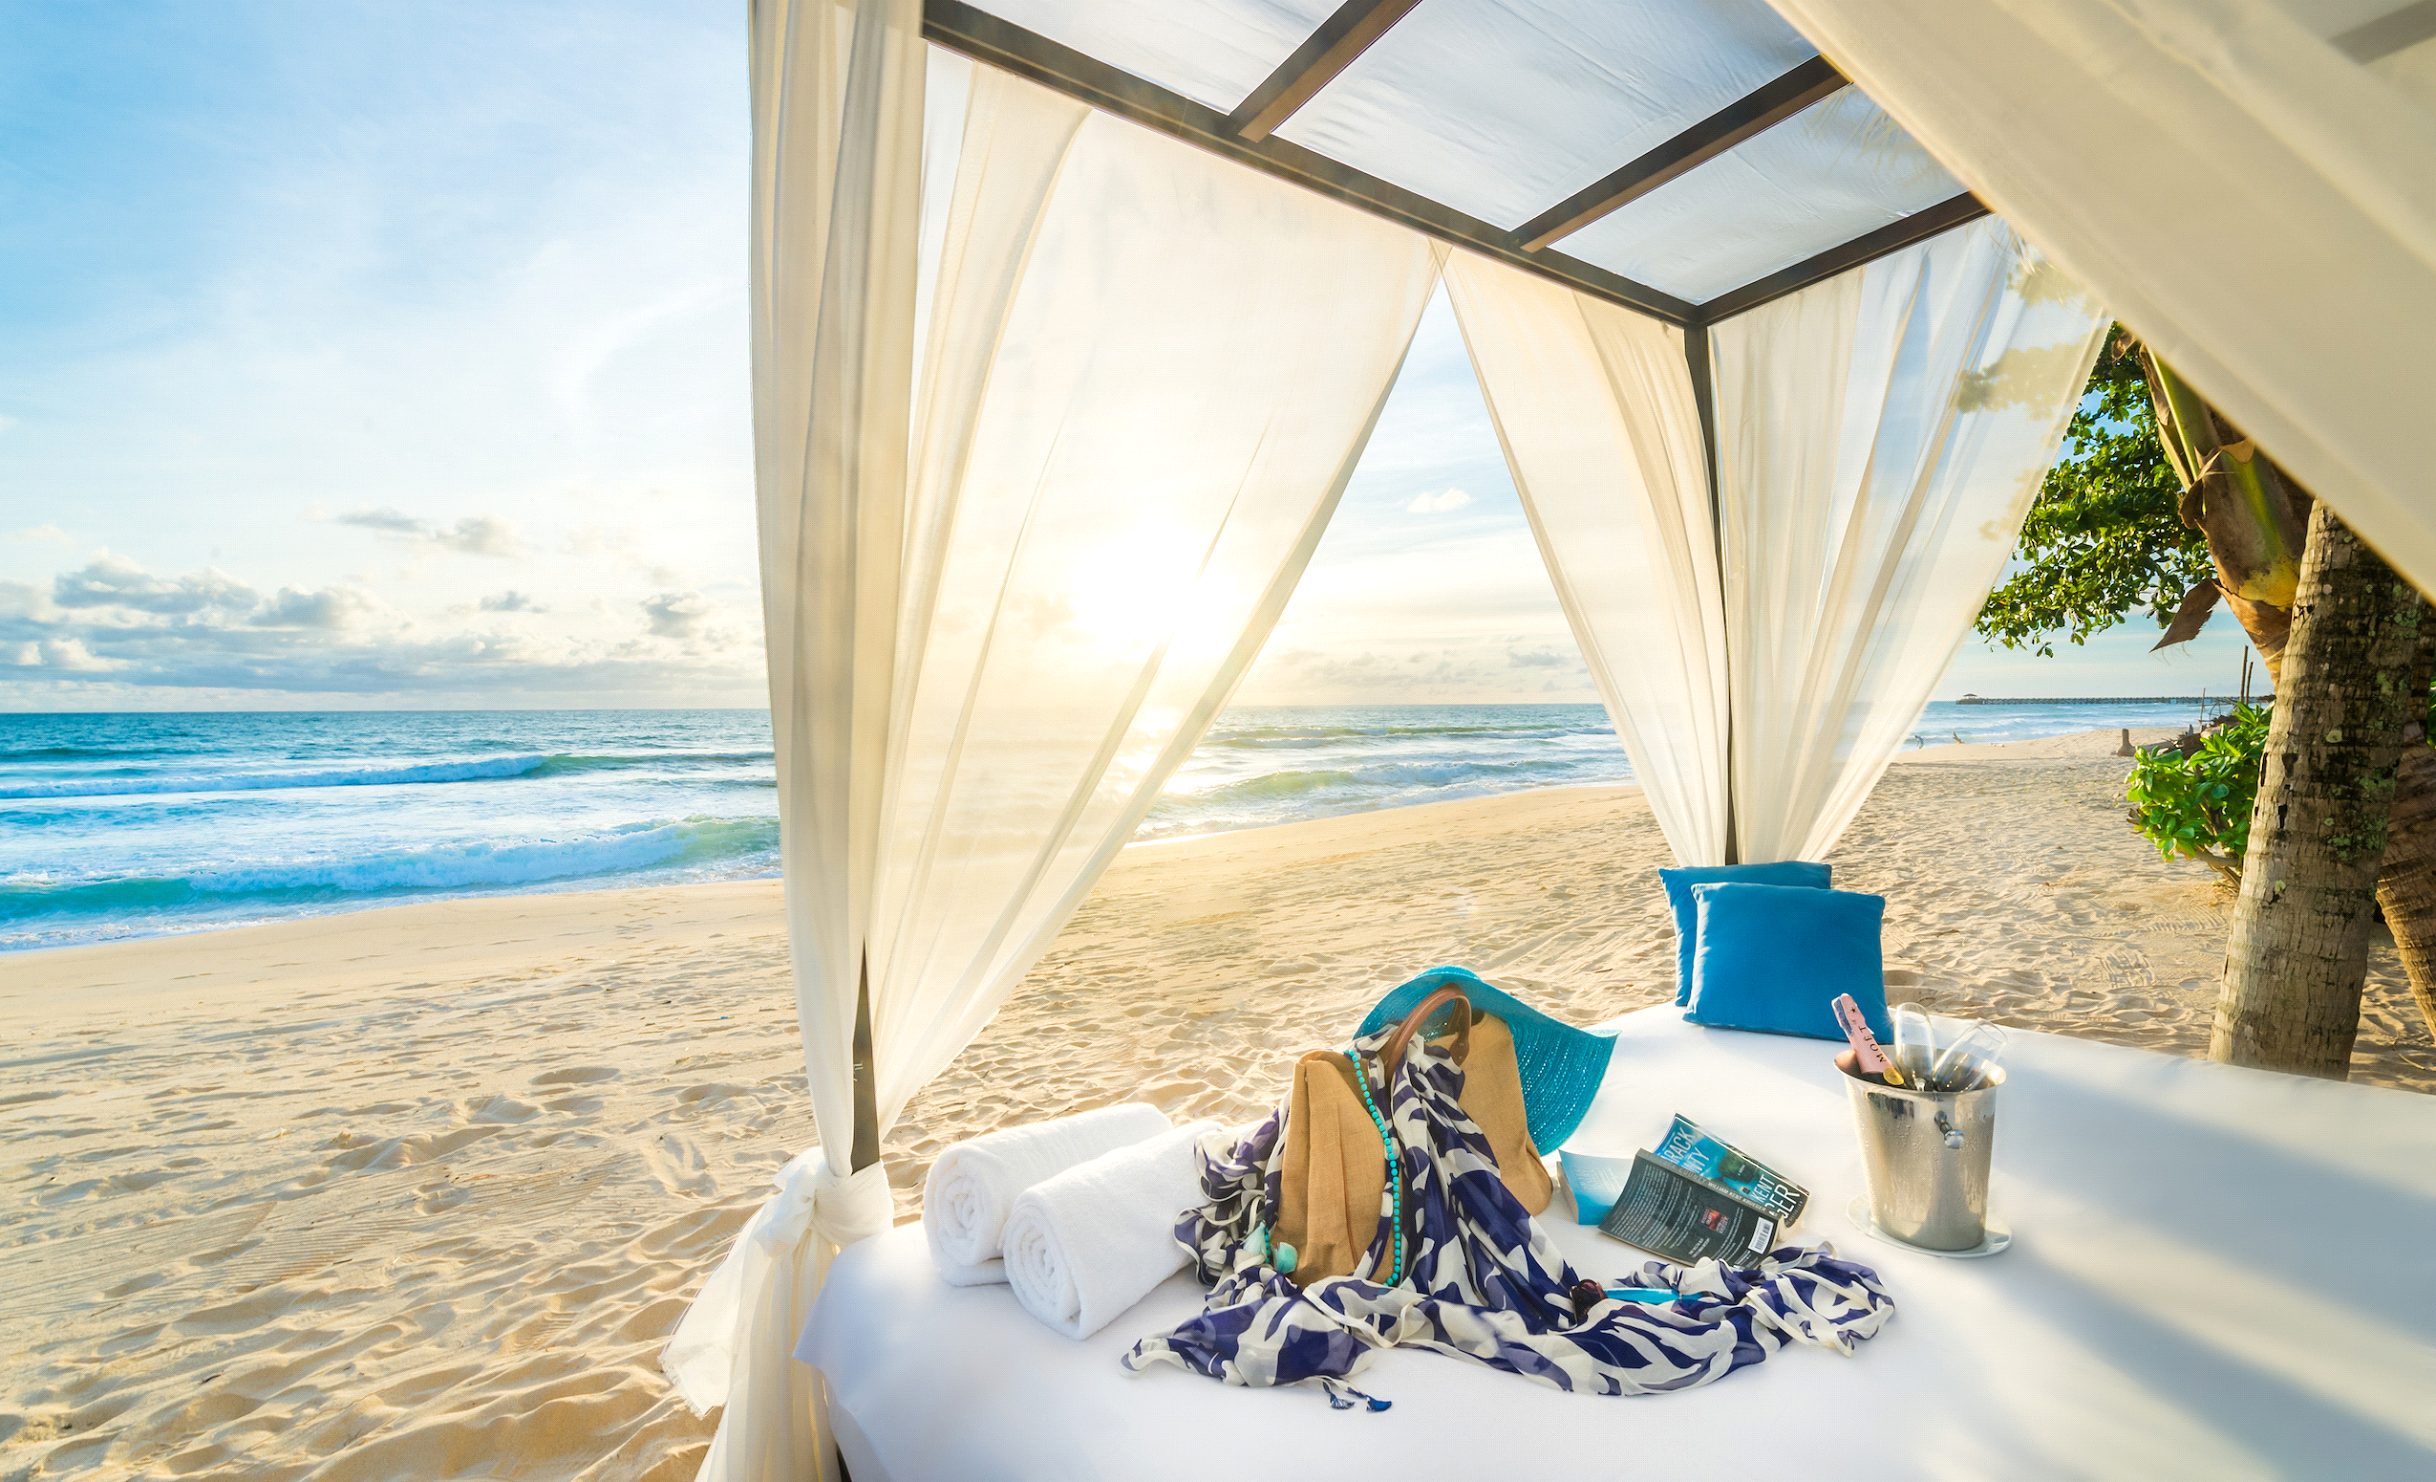 Chilled Perfection: akyra Beach Club is a world away from the well trodden beaches of Phuket.